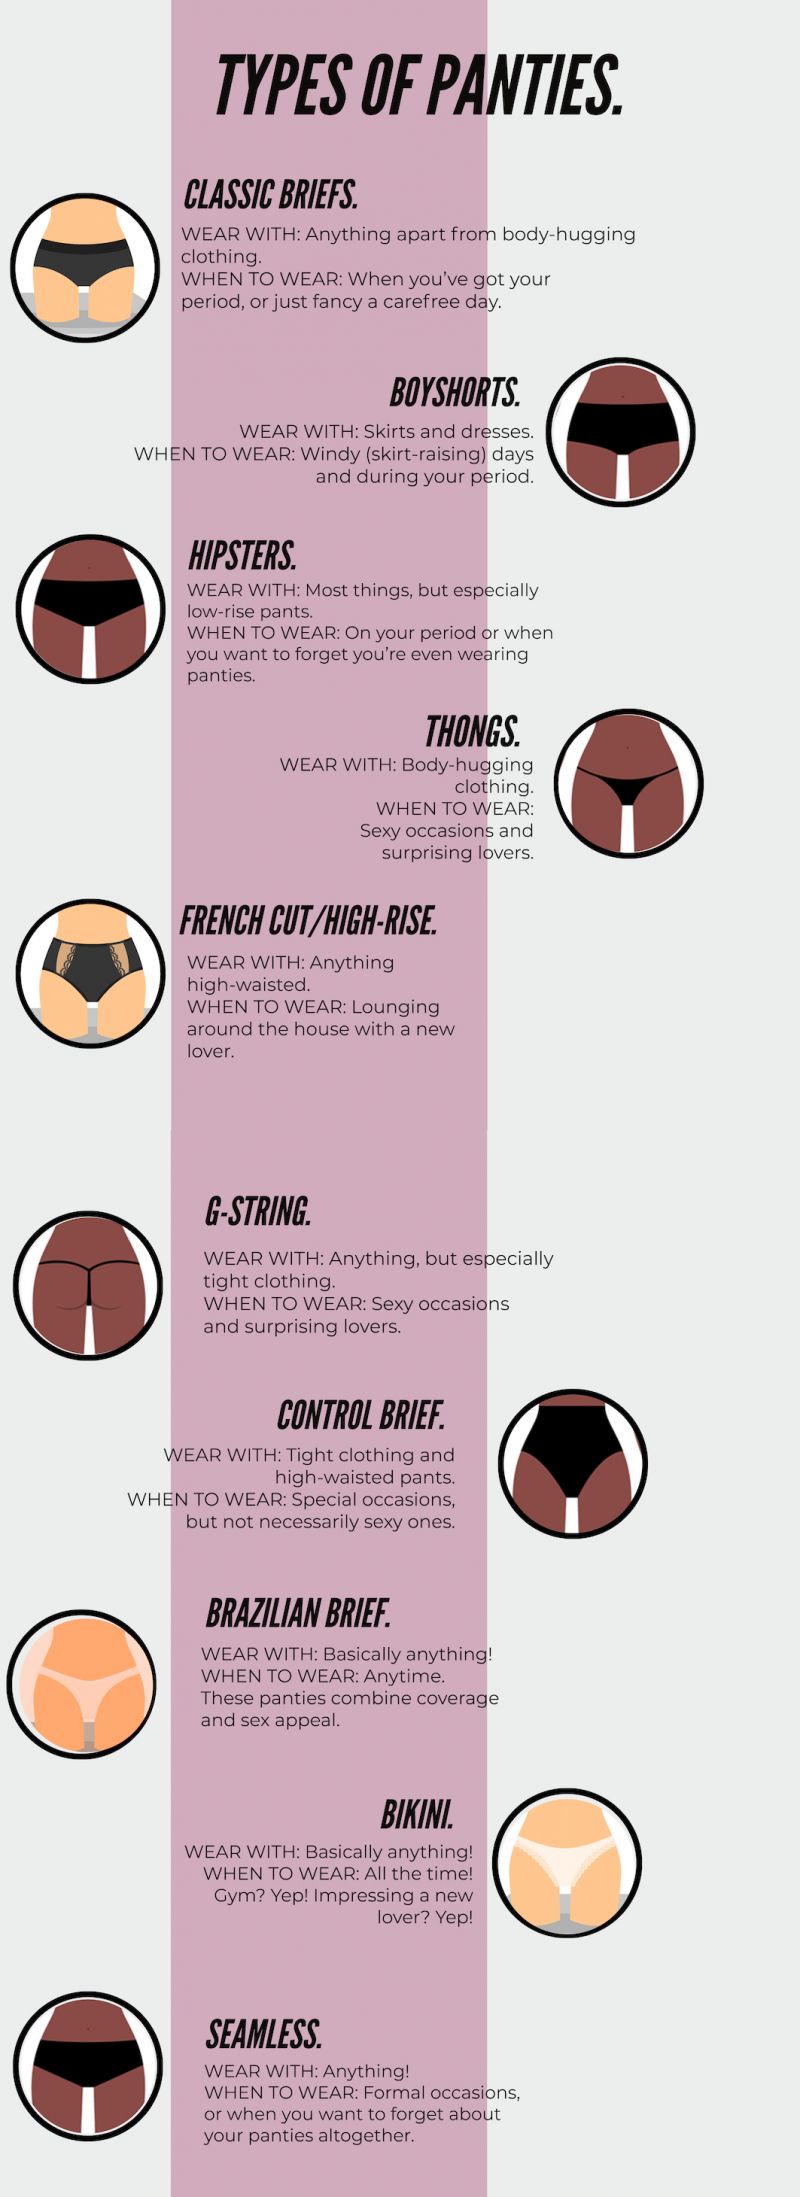 Types of panties infographic